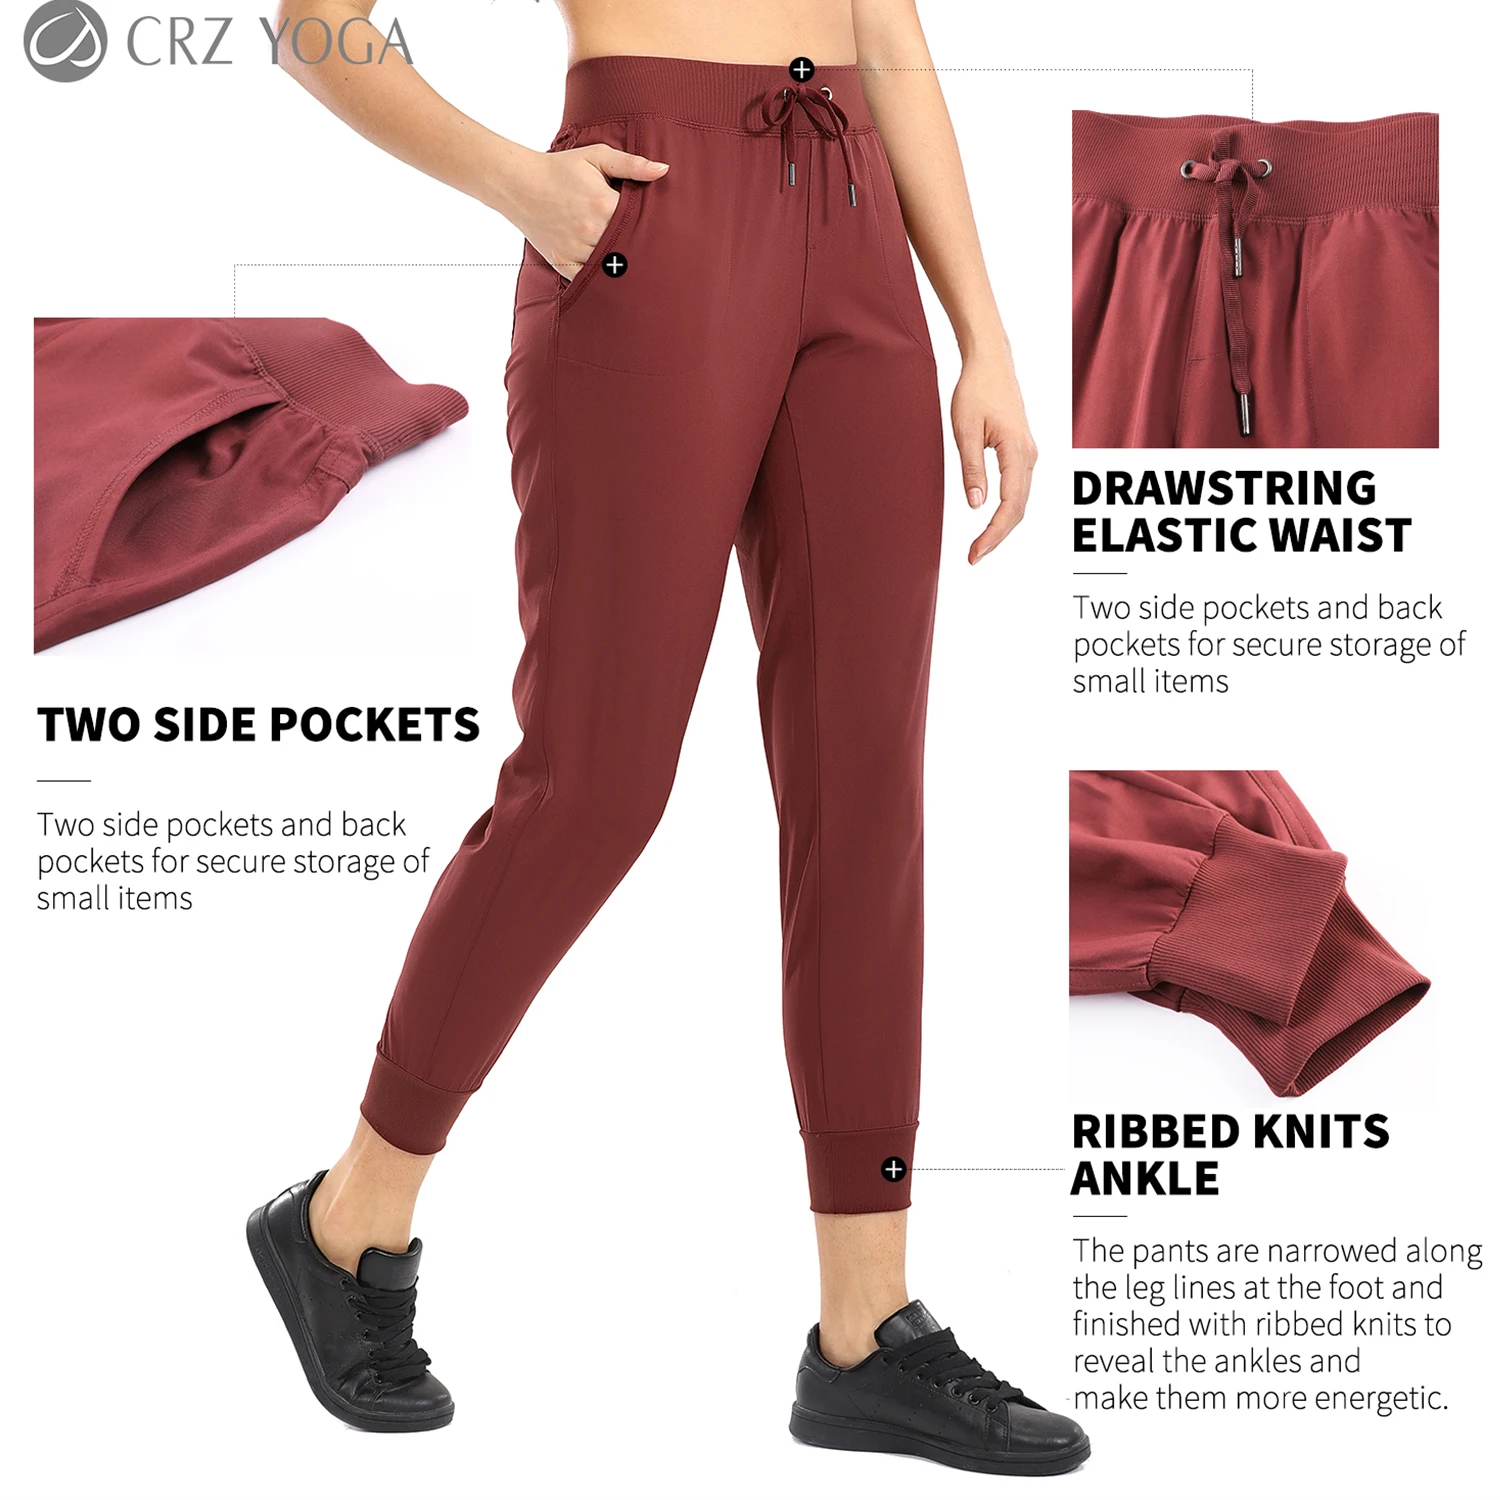 https://ae01.alicdn.com/kf/See49fe1e138d4b4ba2d0cfaee9e8497fw/CRZ-YOGA-Women-s-Lightweight-Joggers-Pants-with-Pockets-Drawstring-Workout-Running-Pants-with-Elastic-Waist.jpg